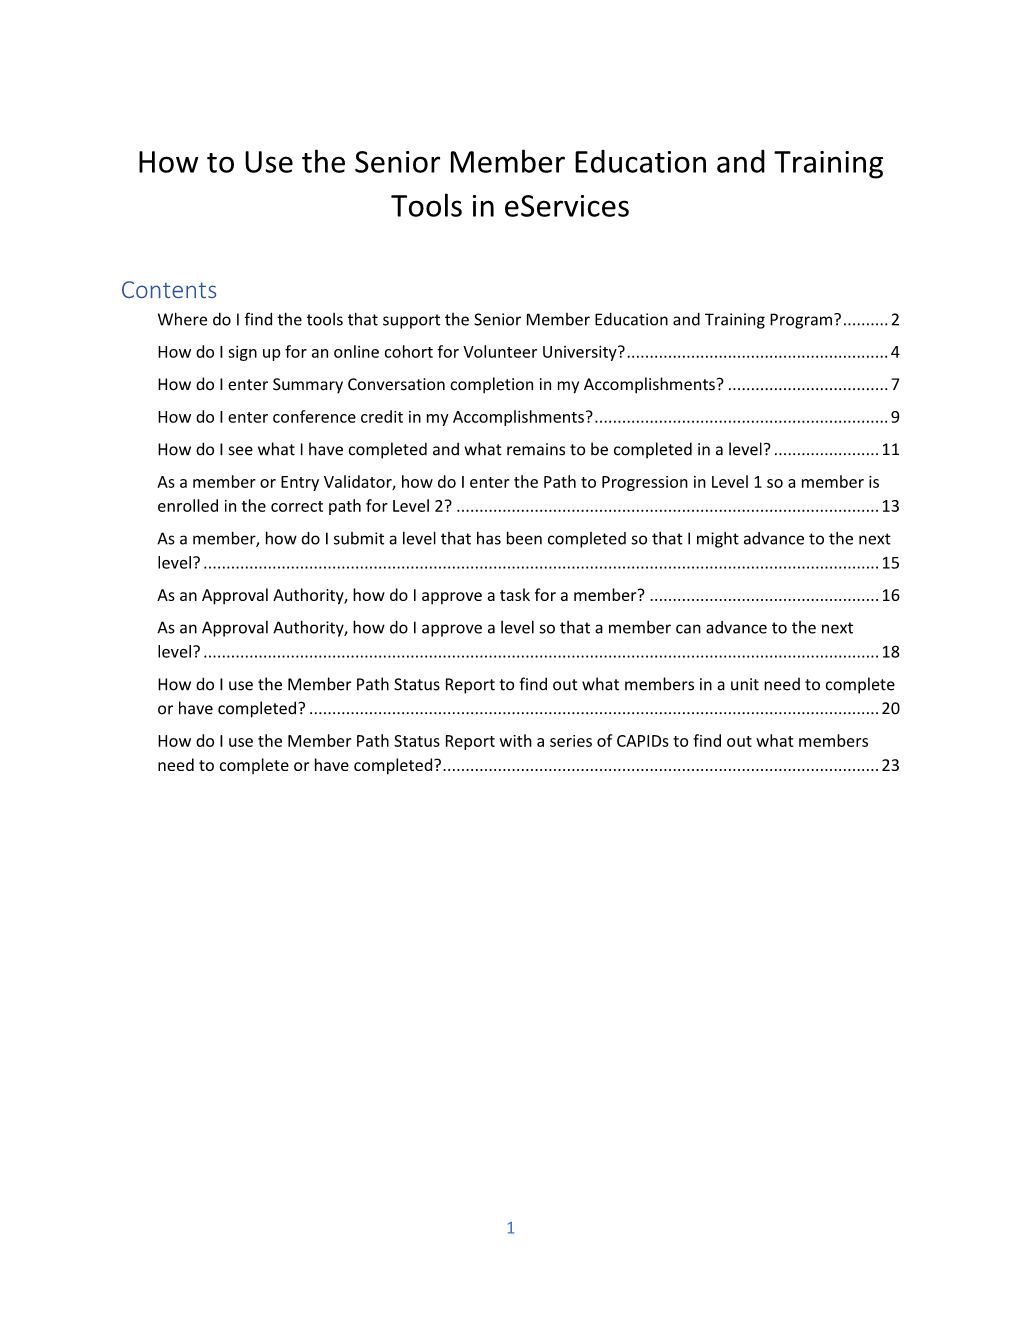 How to Use the Senior Member Education and Training Tools in Eservices